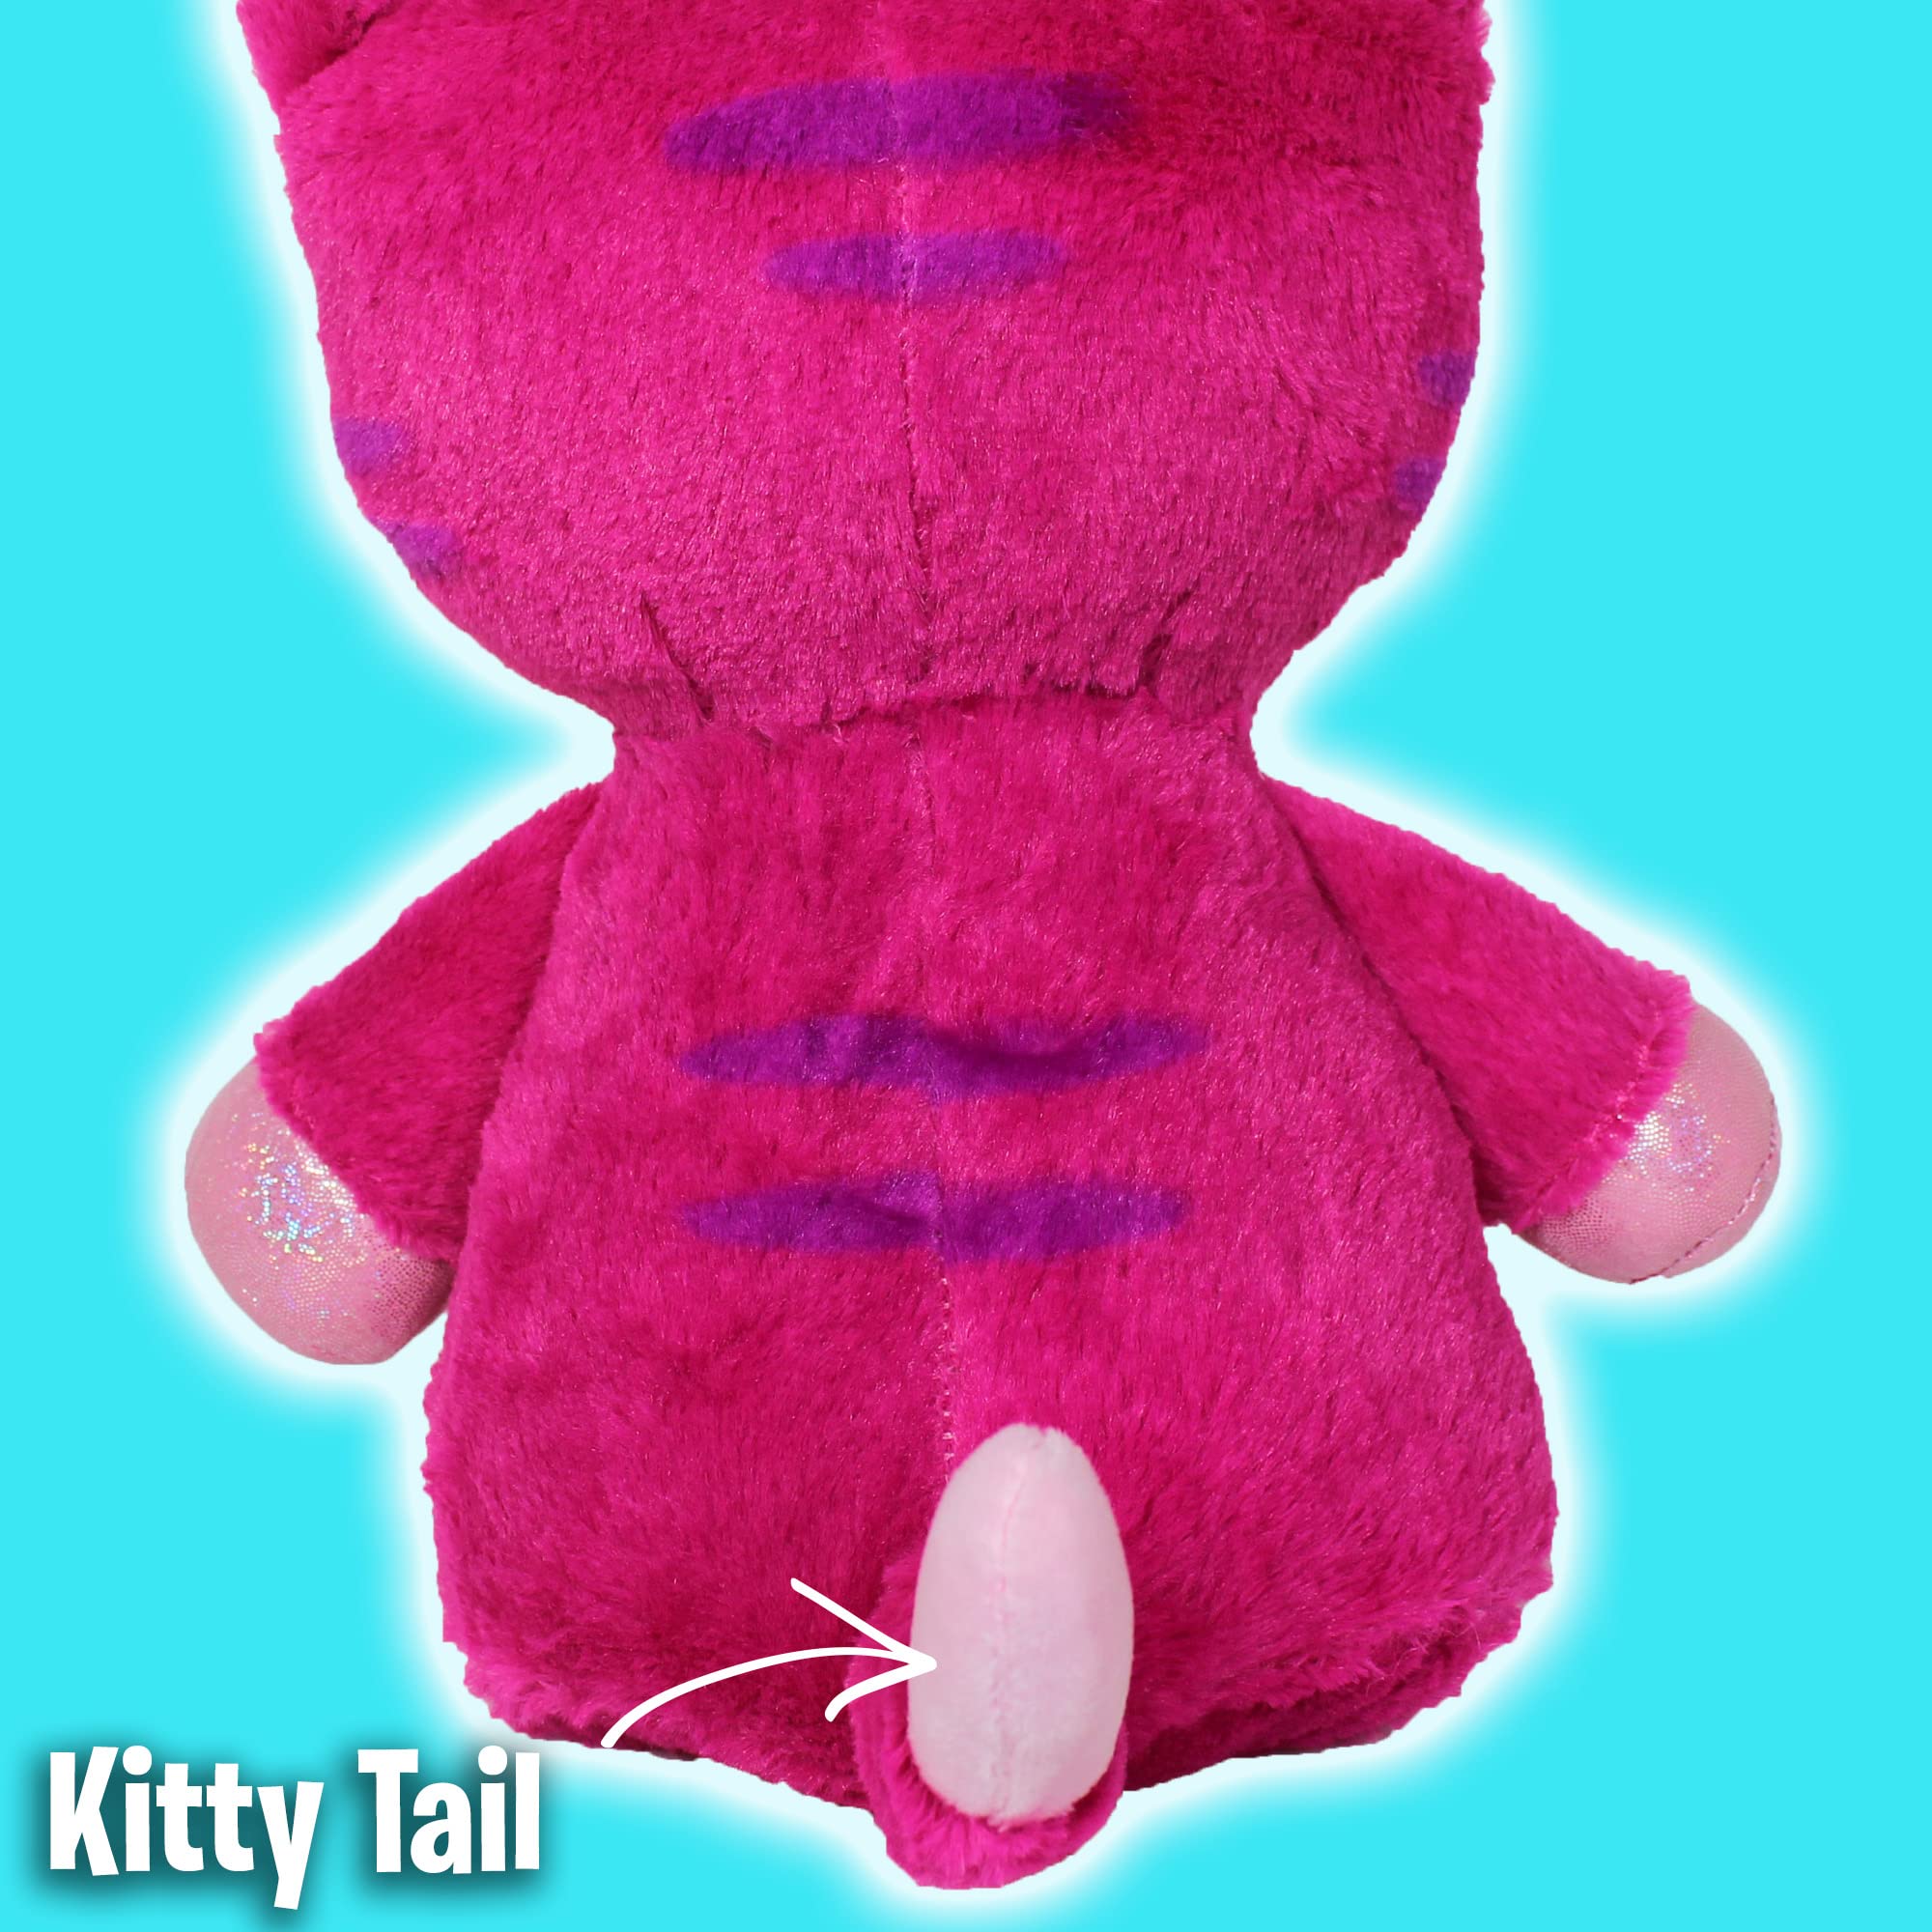 Ontel Star Belly Dream Lites, Stuffed Animal Night Light, 3 years and up, Pretty Pink Kitty - Projects Glowing Stars & Shapes in 6 Gentle Colors, As Seen on TV